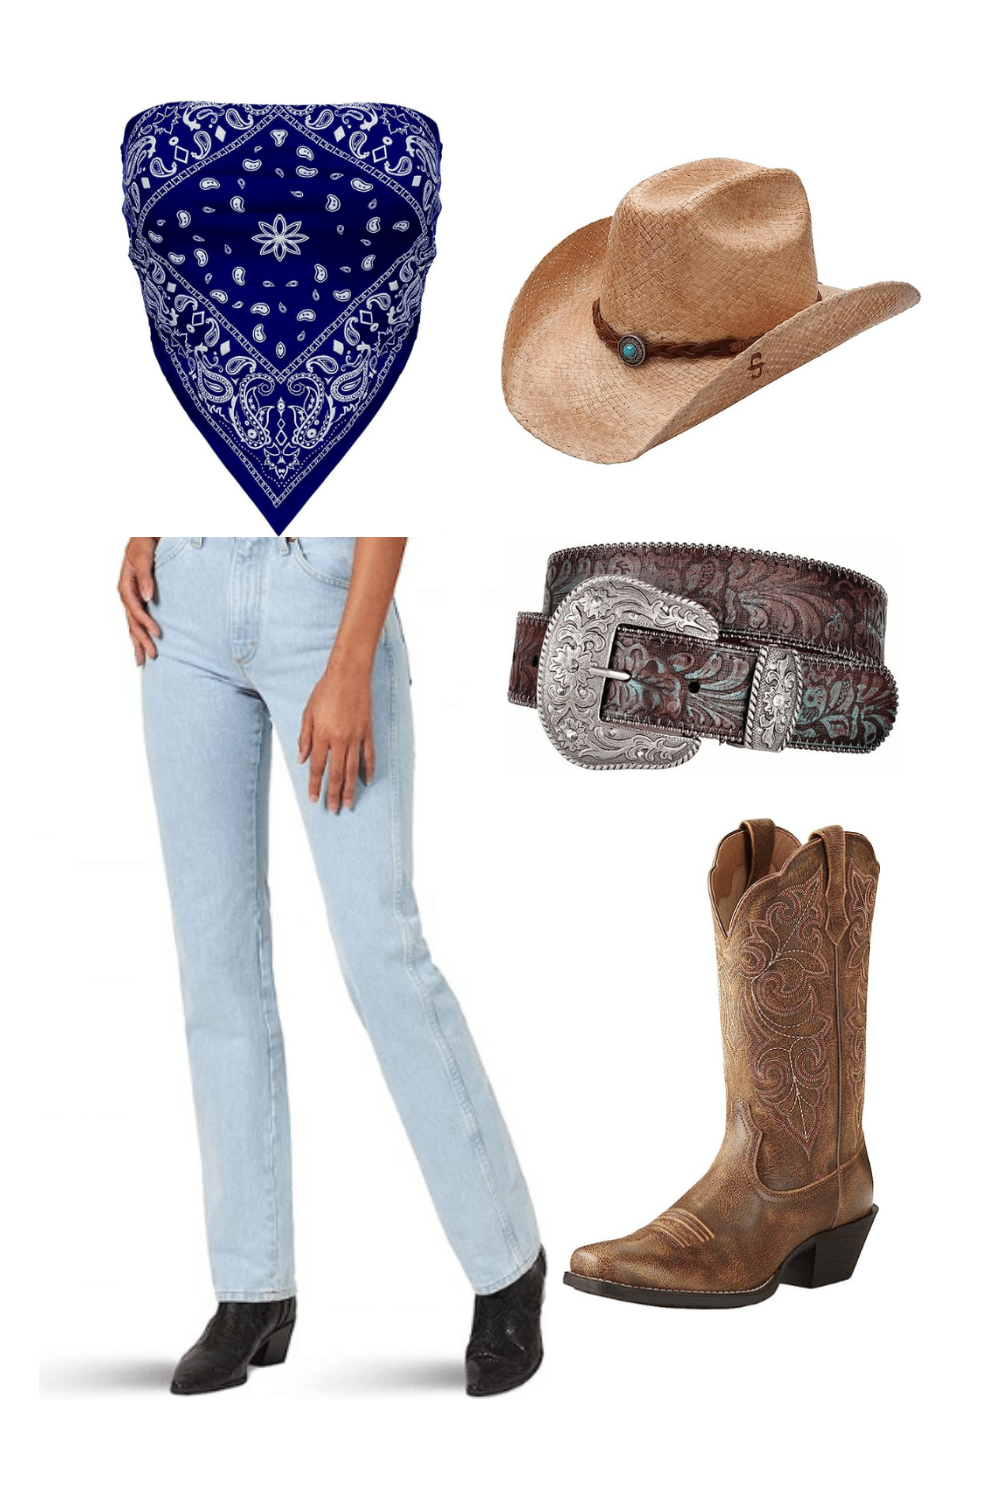 Get Ready to Embrace the Coastal Cowgirl